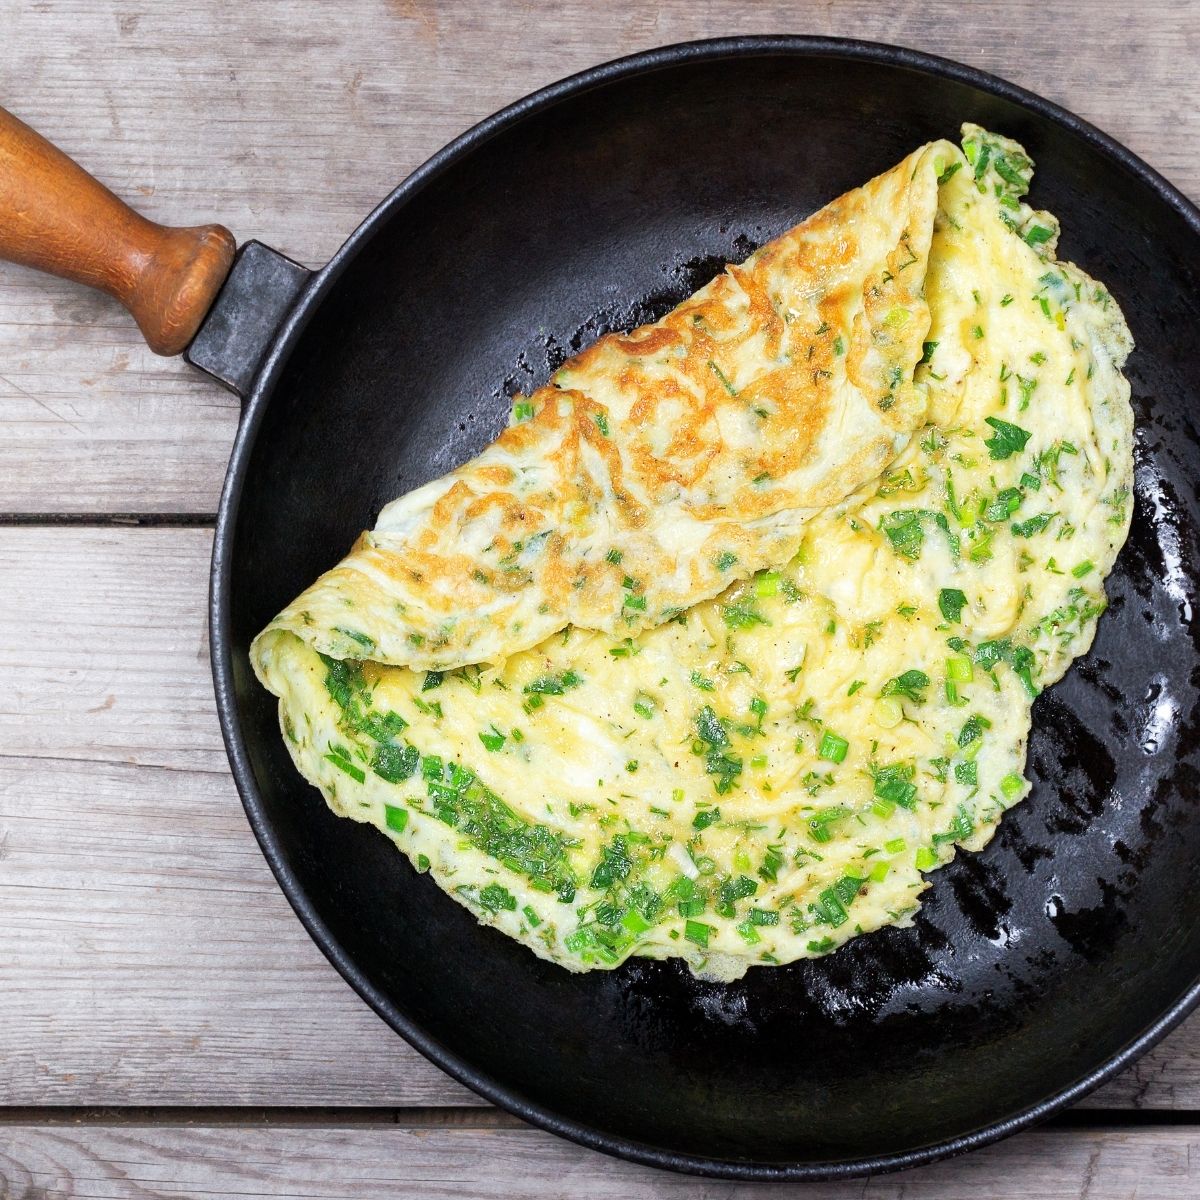 omelet with herbs in a frying pan